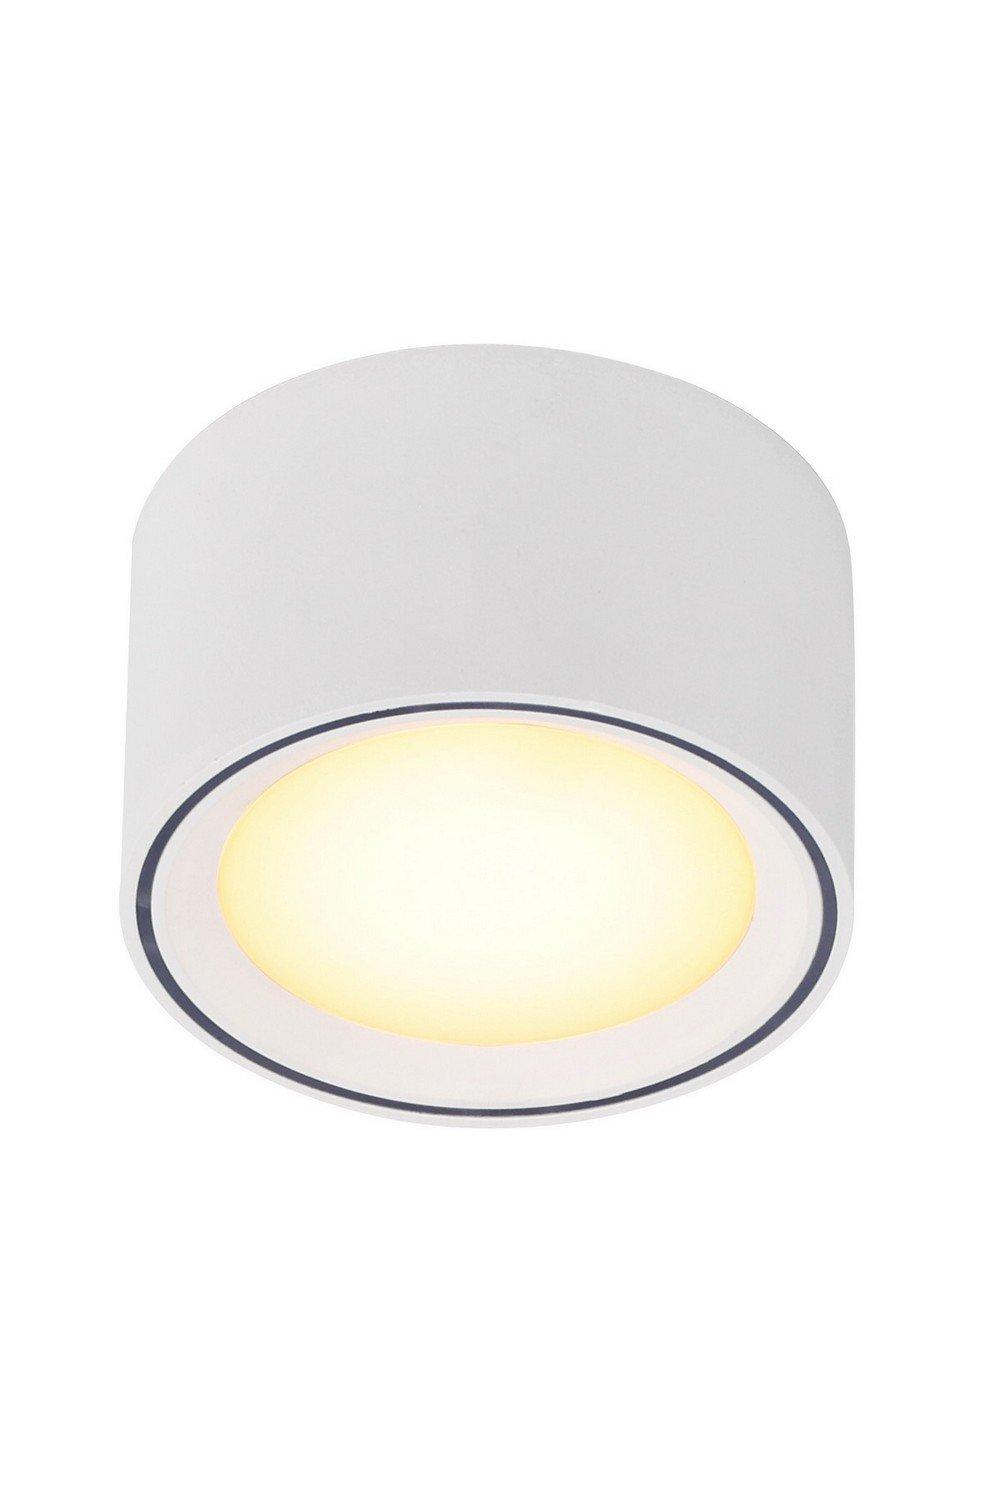 Fallon LED Dimmable Surface Mounted Downlight White 2700K